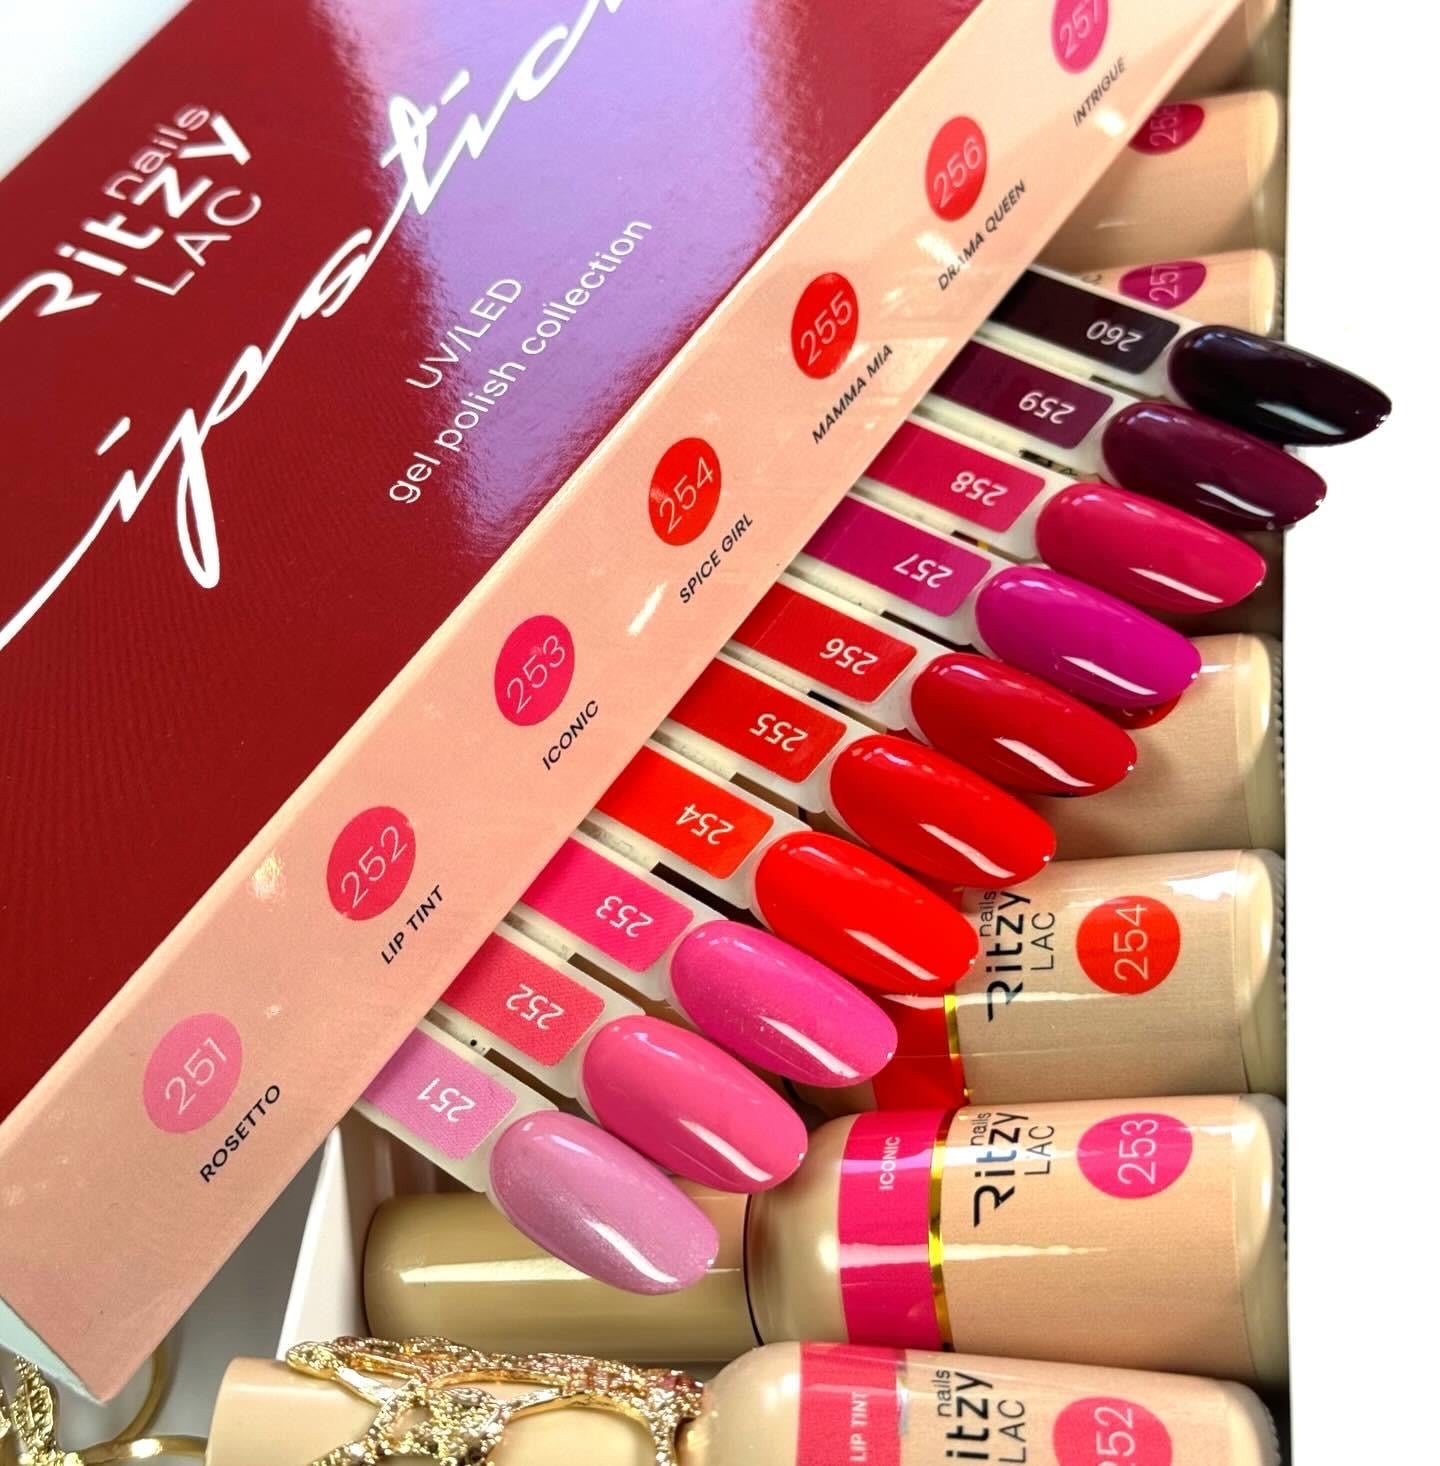 Ritzy Nails “Lipstick” collection of 10 colors x 9ml